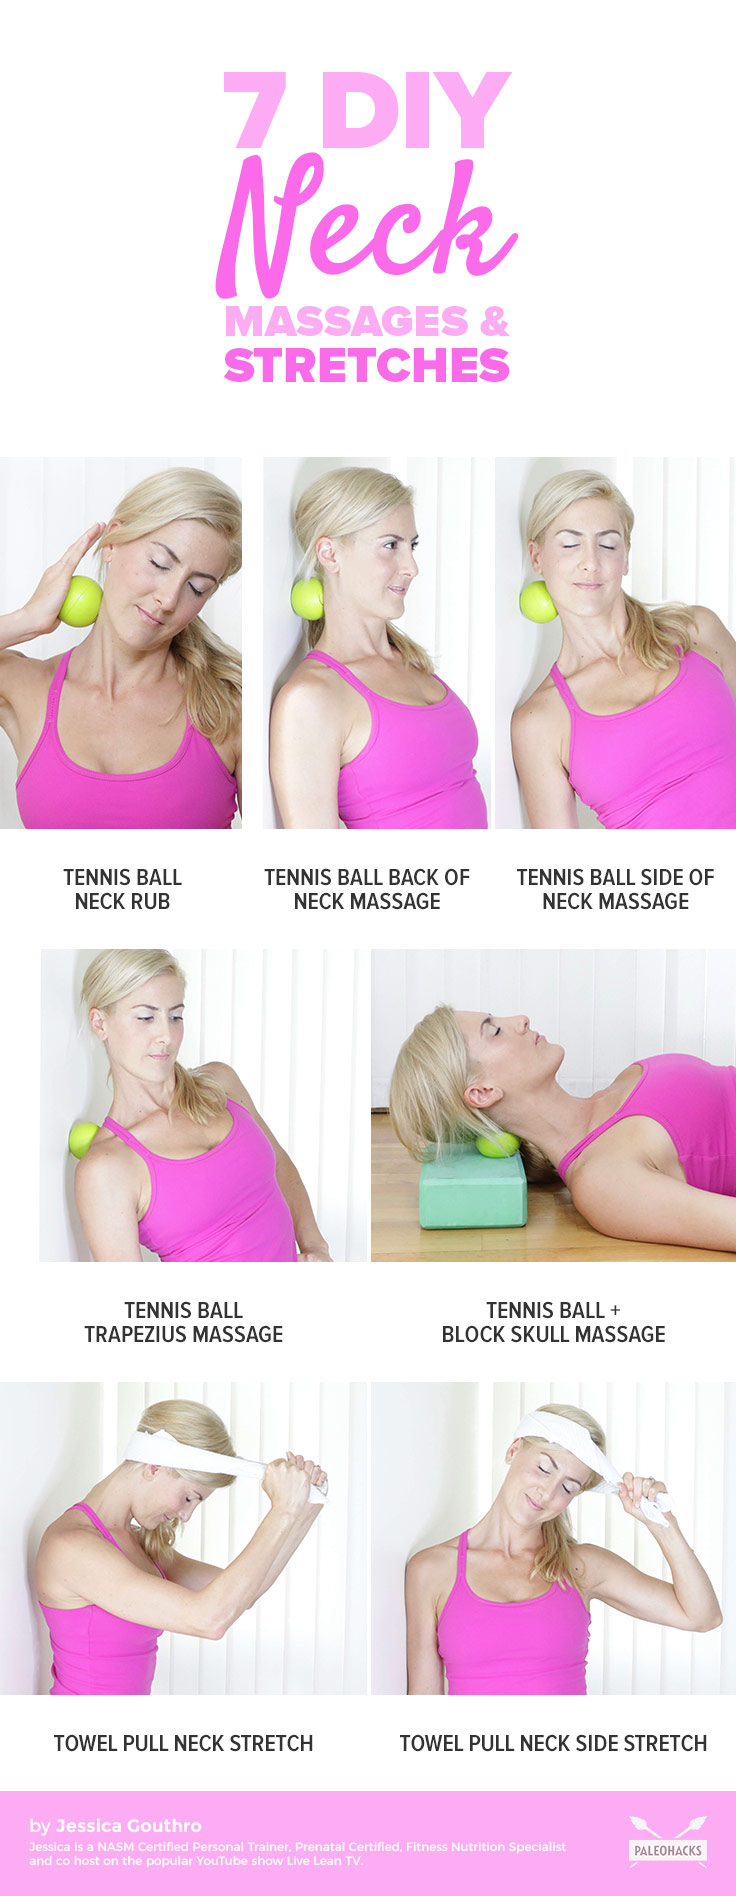 By doing these simple self-massages, you’ll not only feel better in your neck, but you’ll help reduce your overall stress and feel more relaxed.